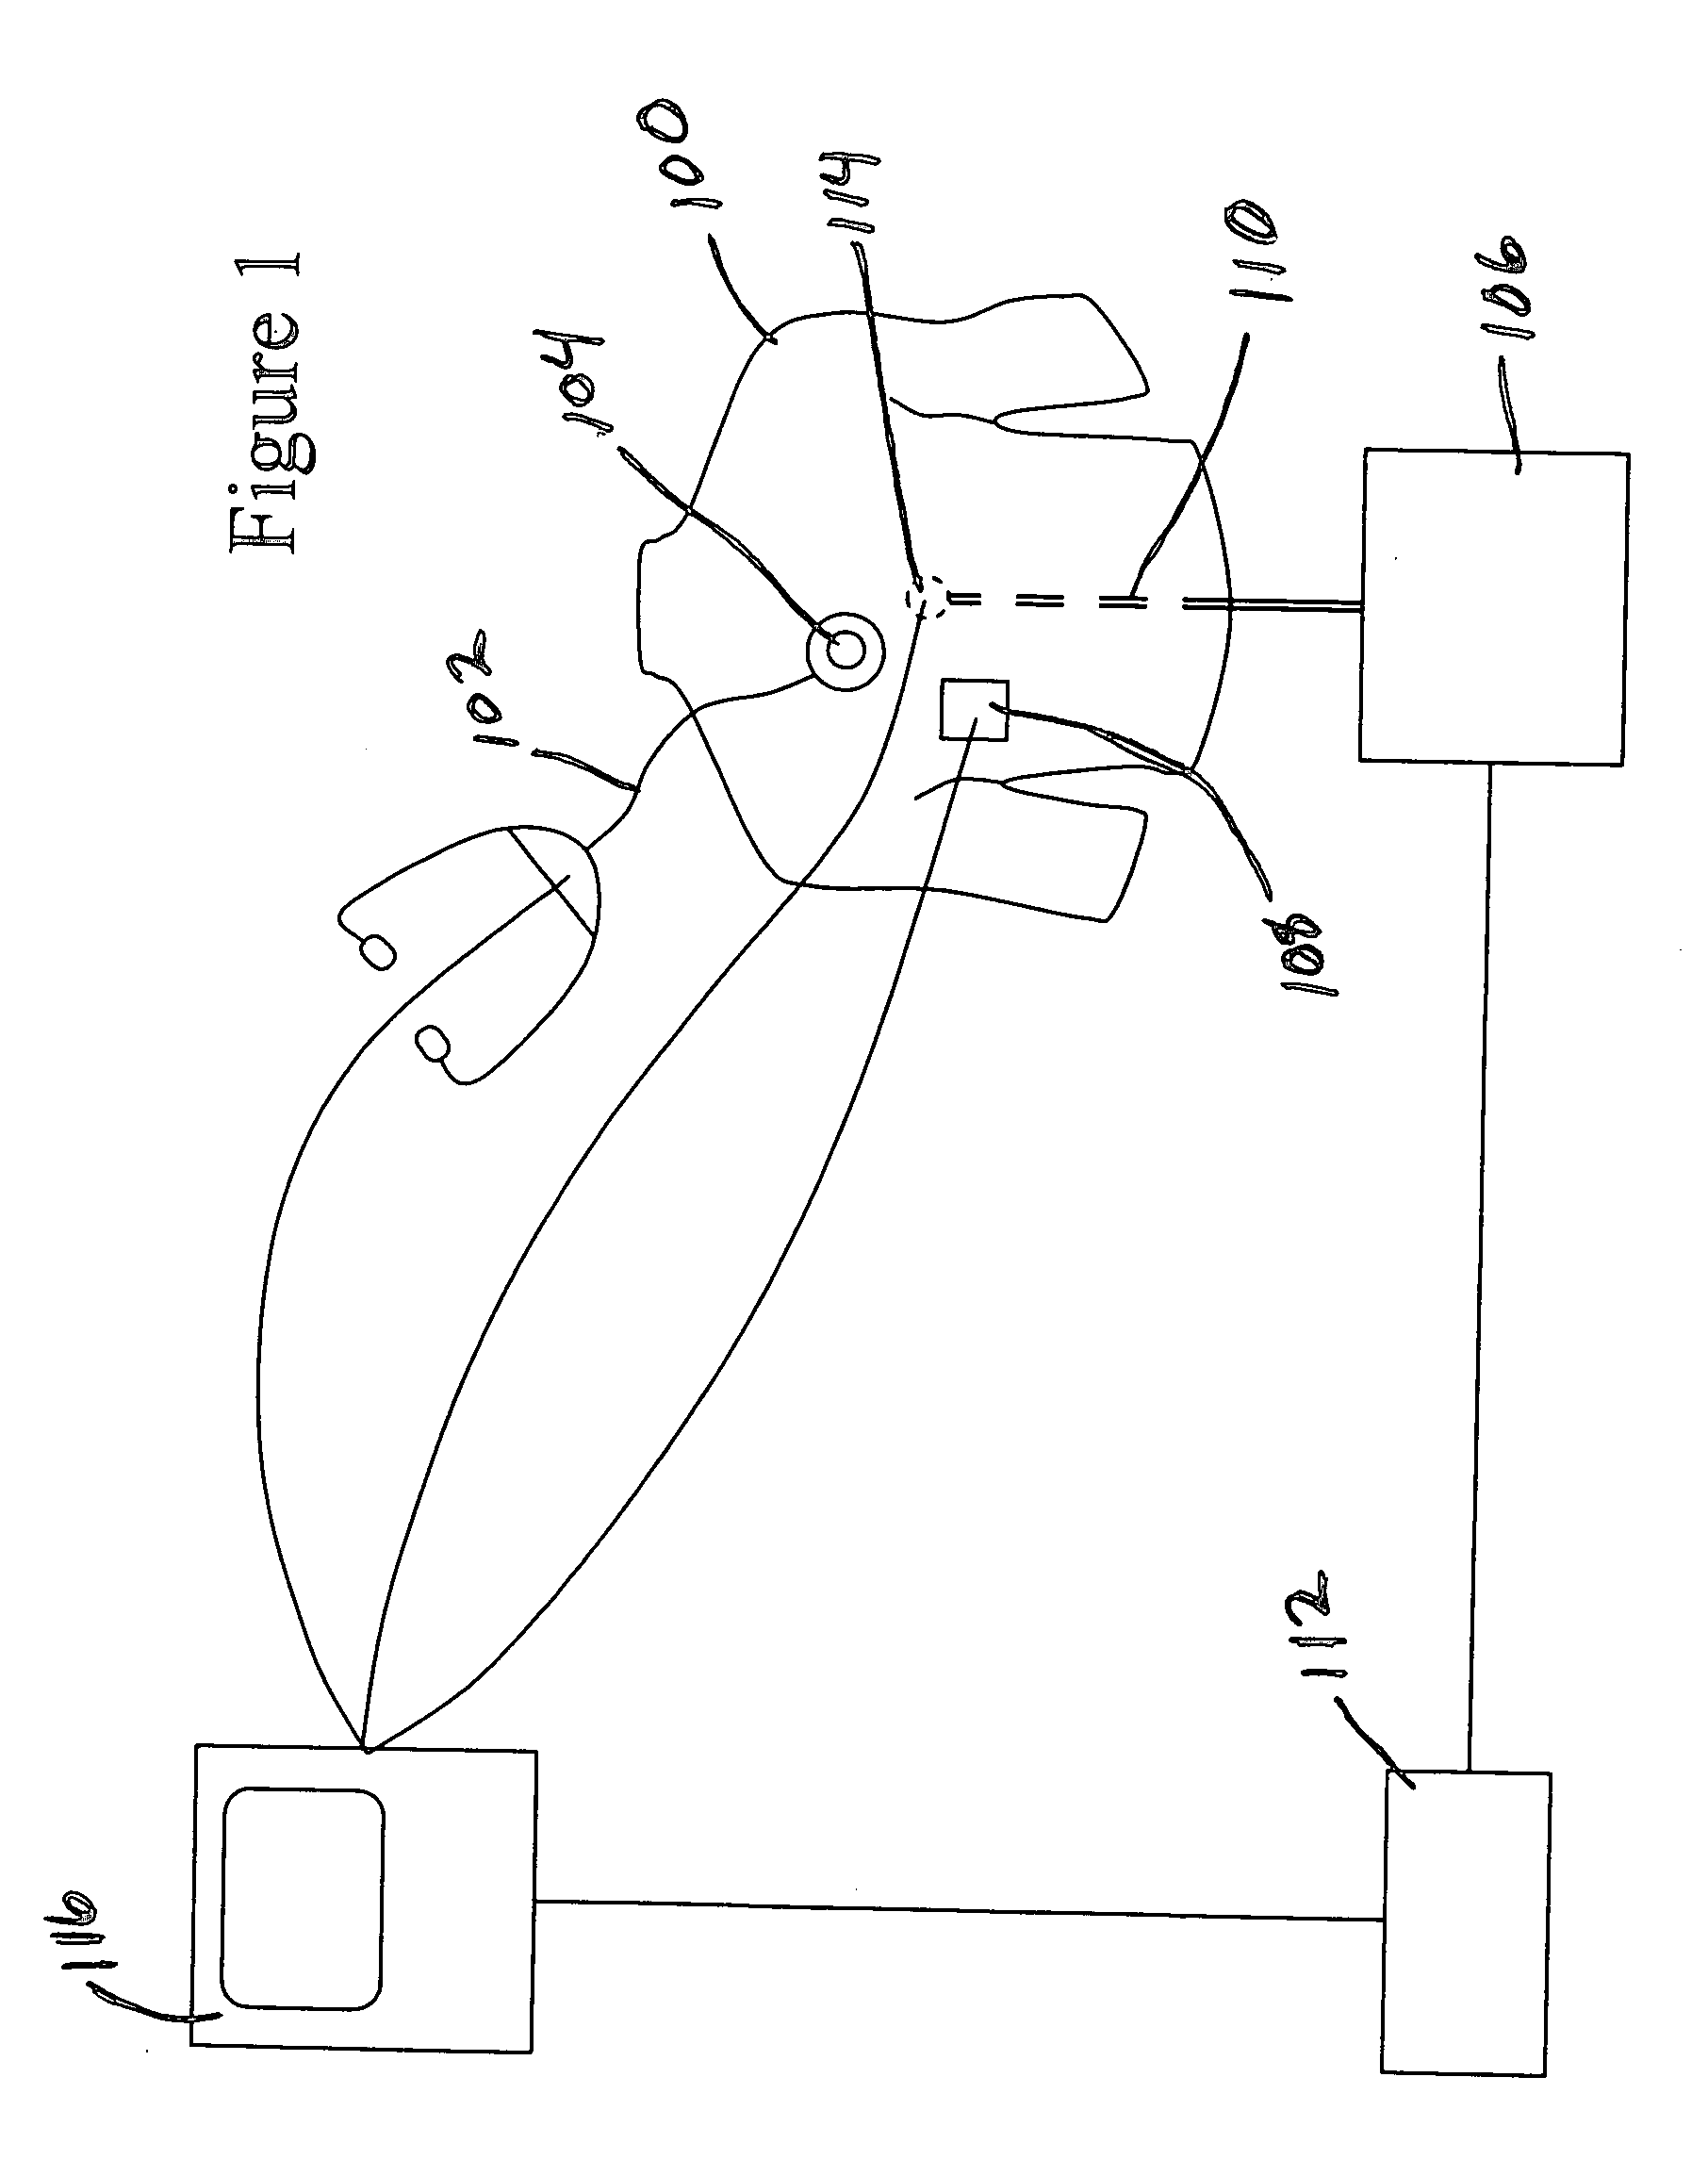 Electronic stethoscope measurement system and method